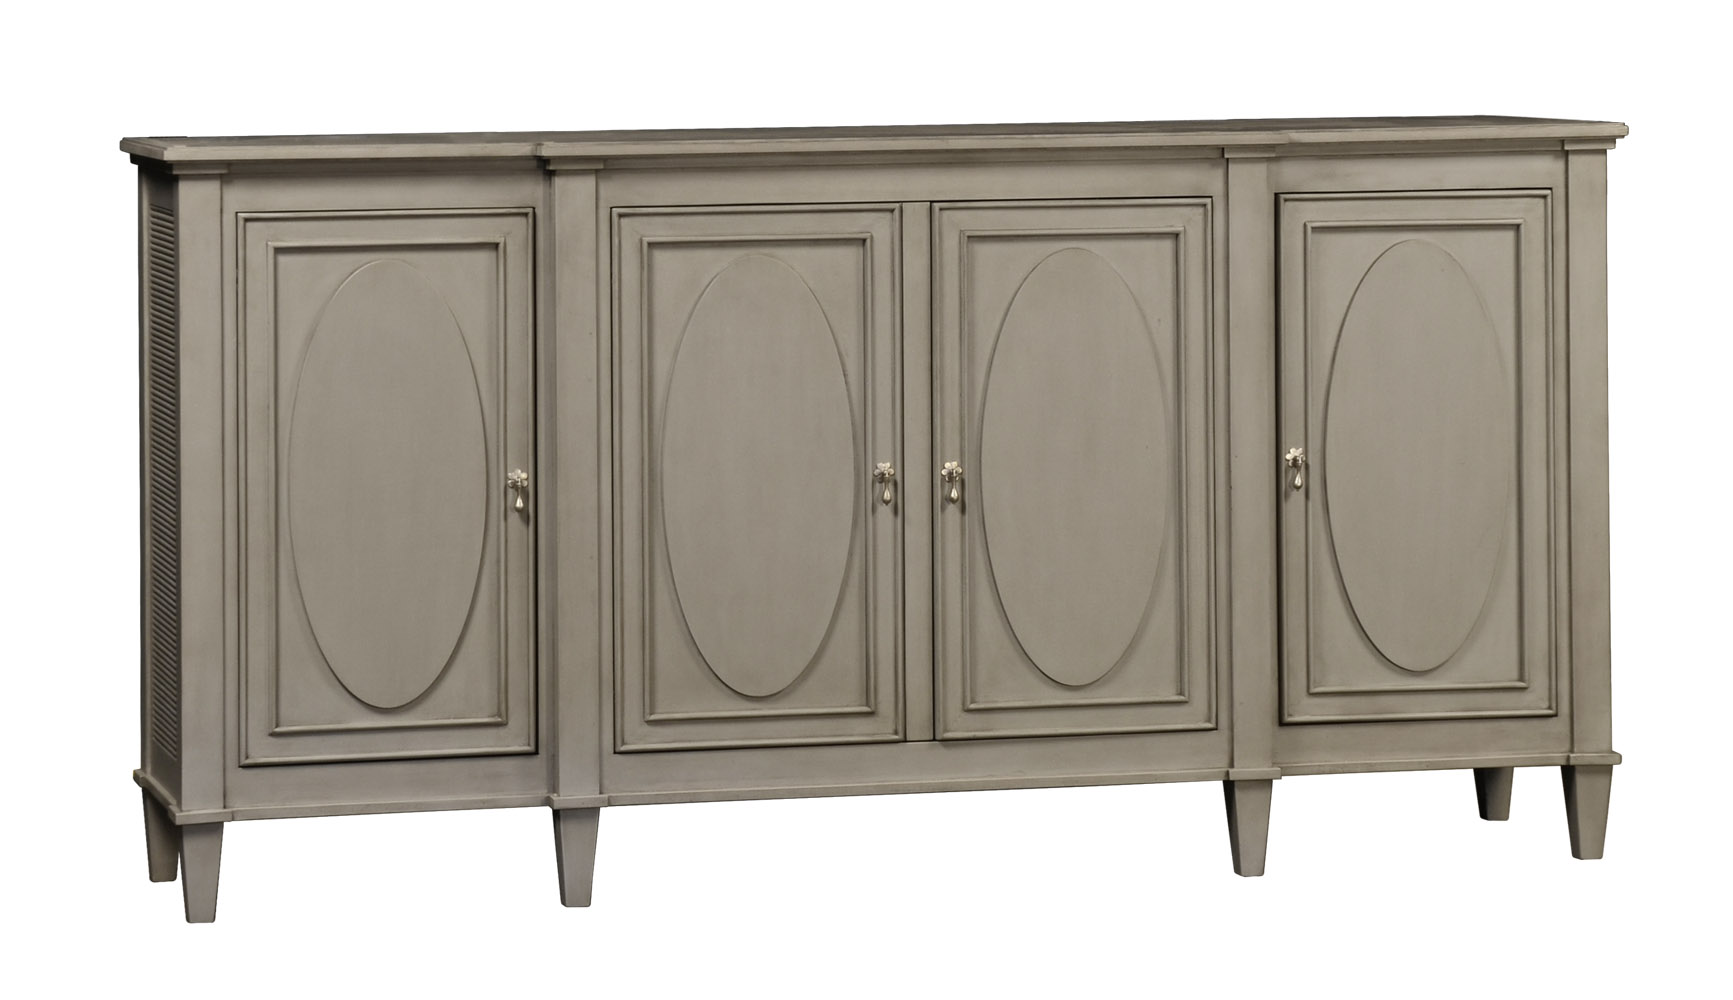 Boyce transitional sideboard cabinet with oval door panels by Woodland furniture in Idaho Falls